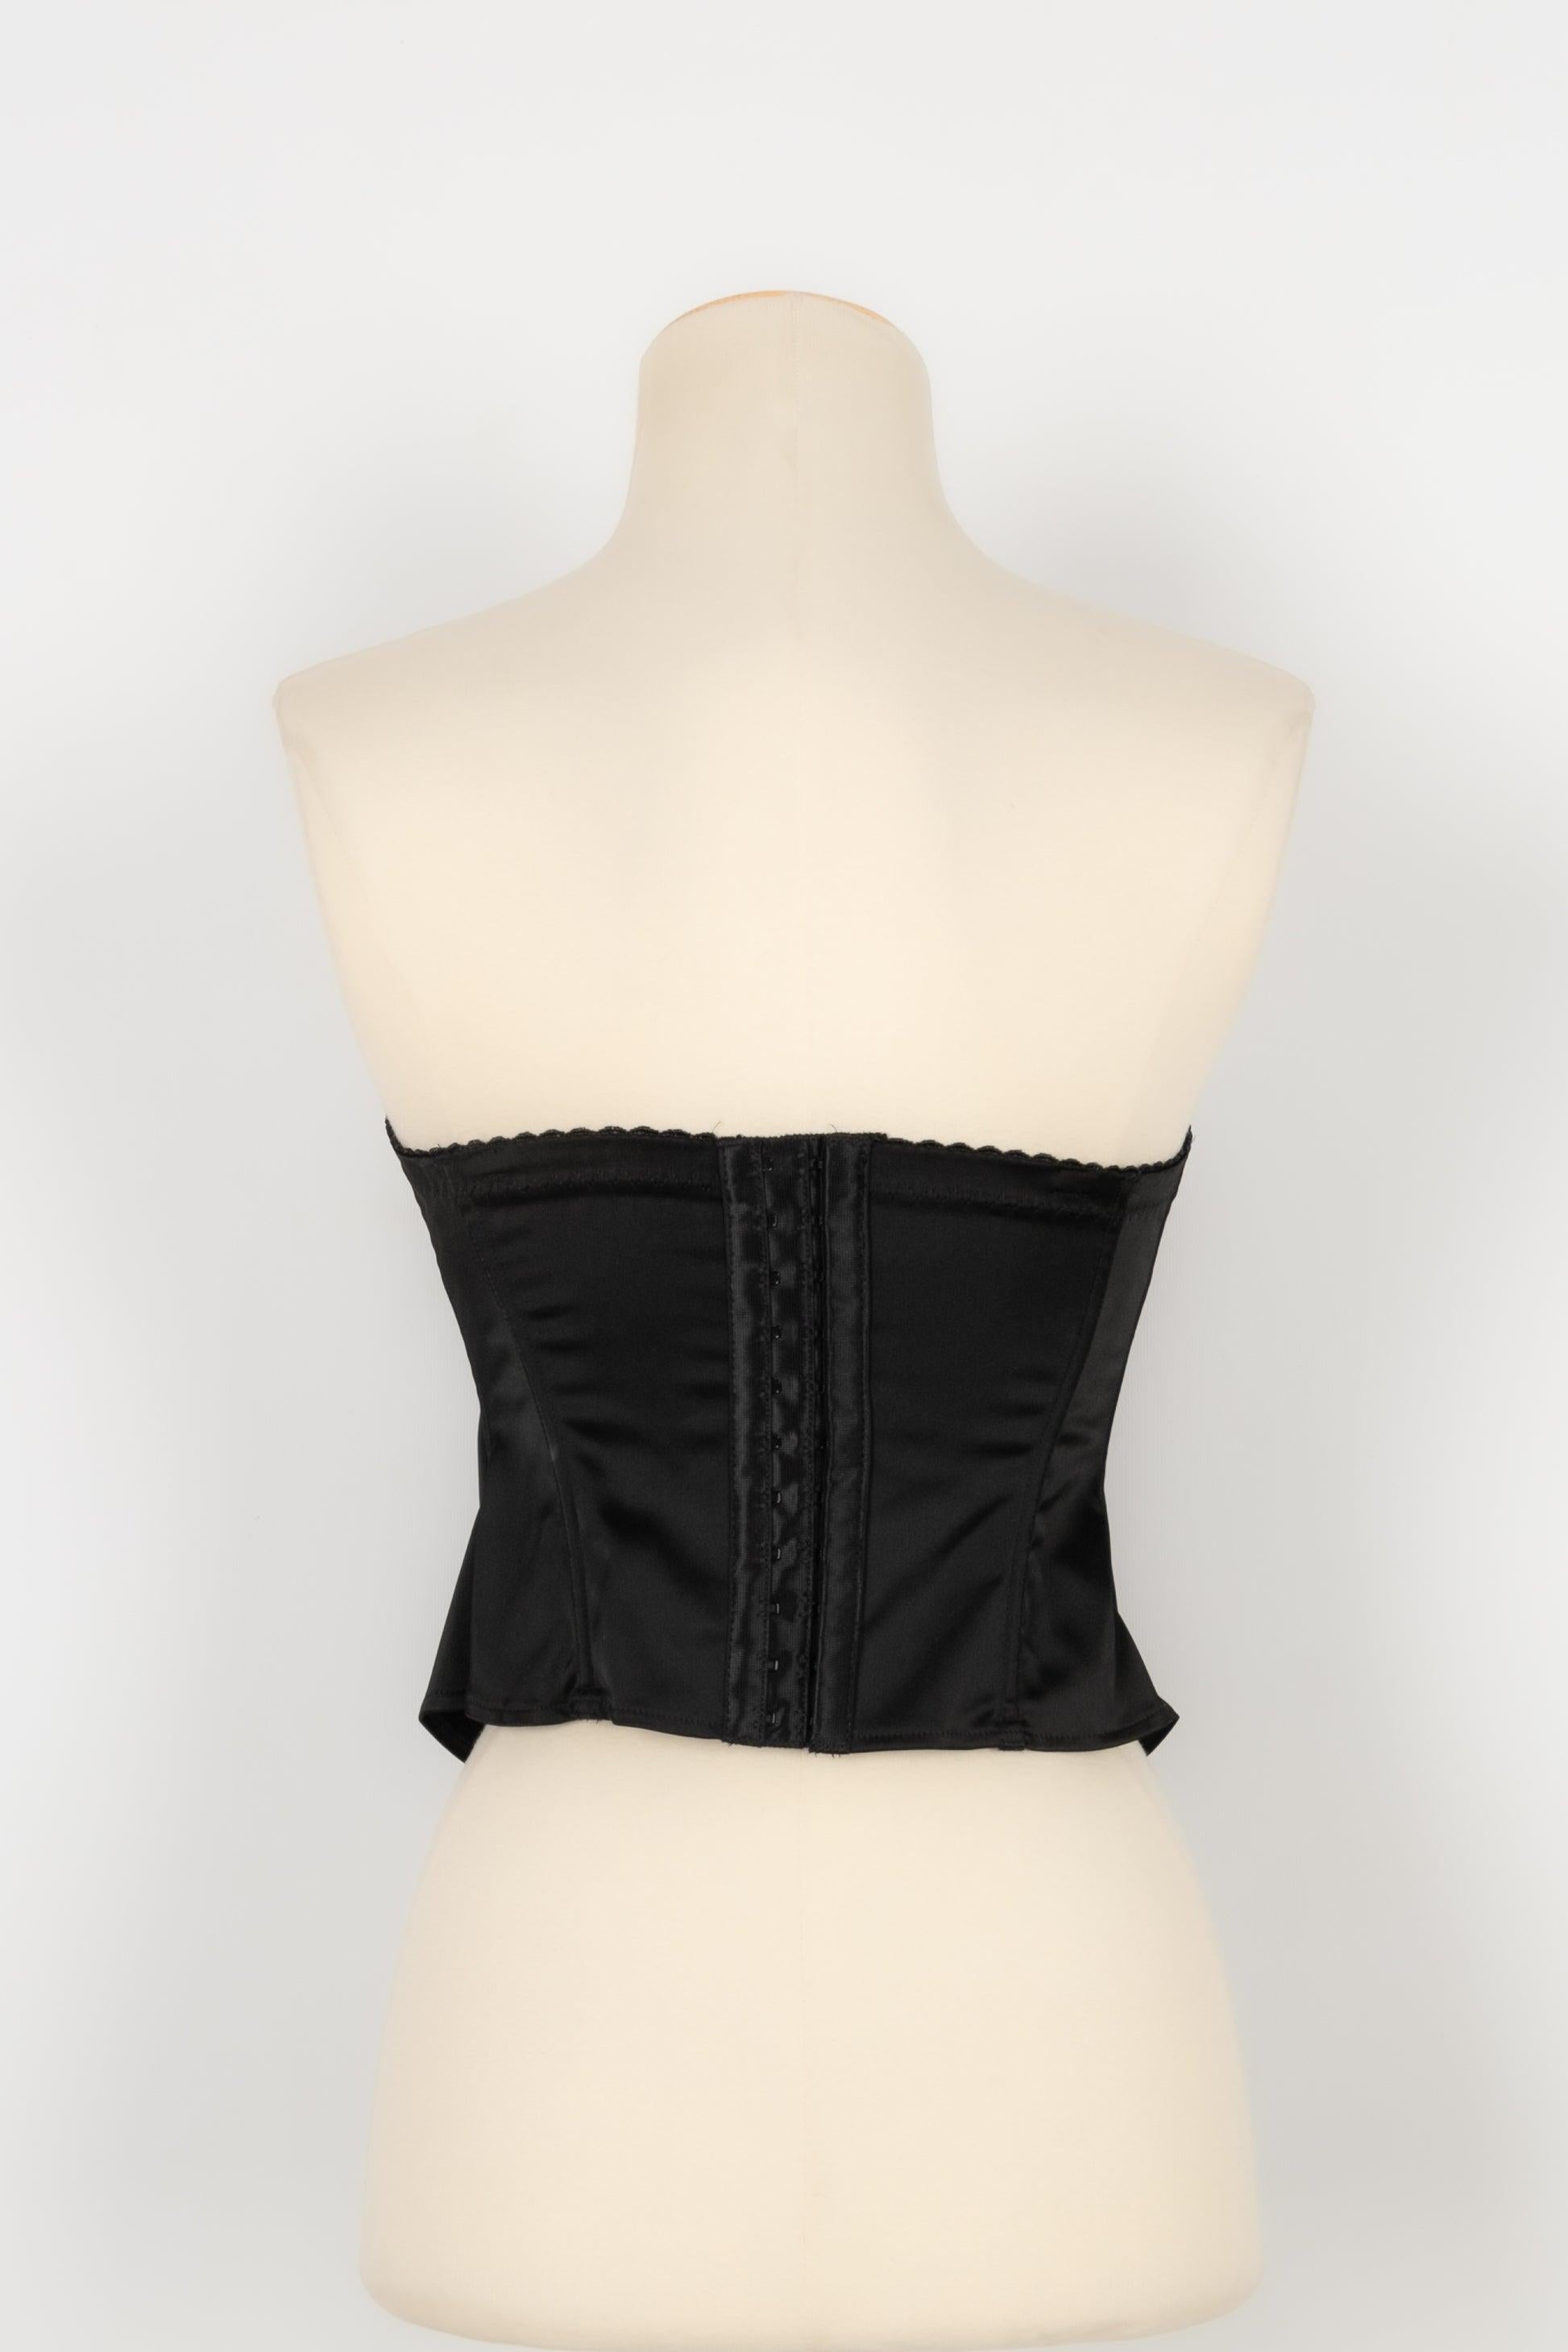 Women's Nina Ricci Black Bustier Top with Embroidery Decorations 36FR For Sale